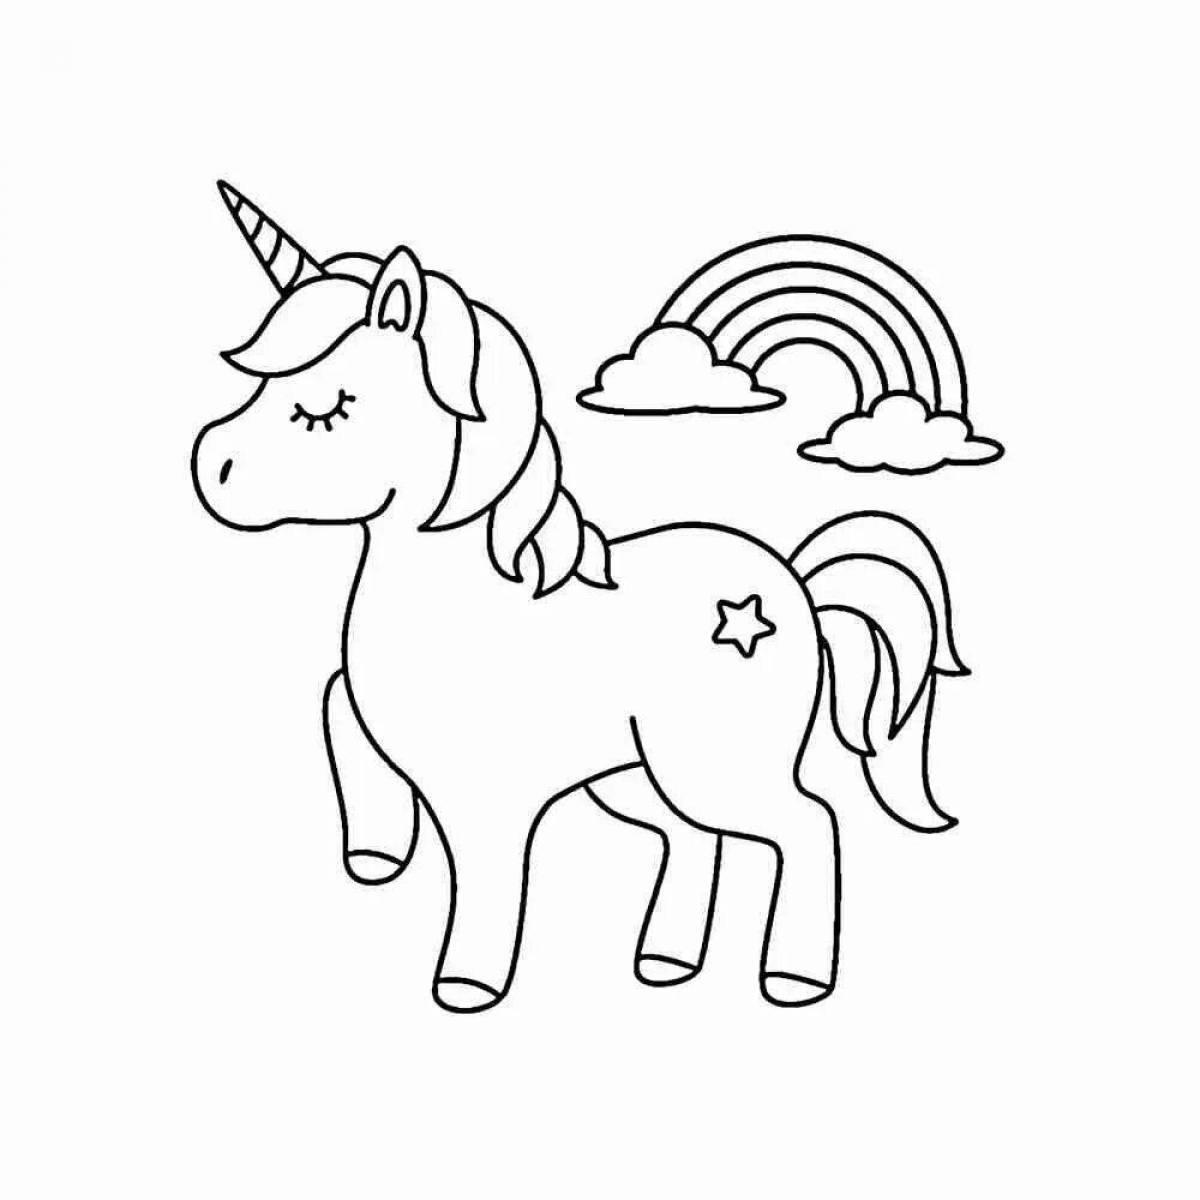 Amazing unicorn coloring book for kids